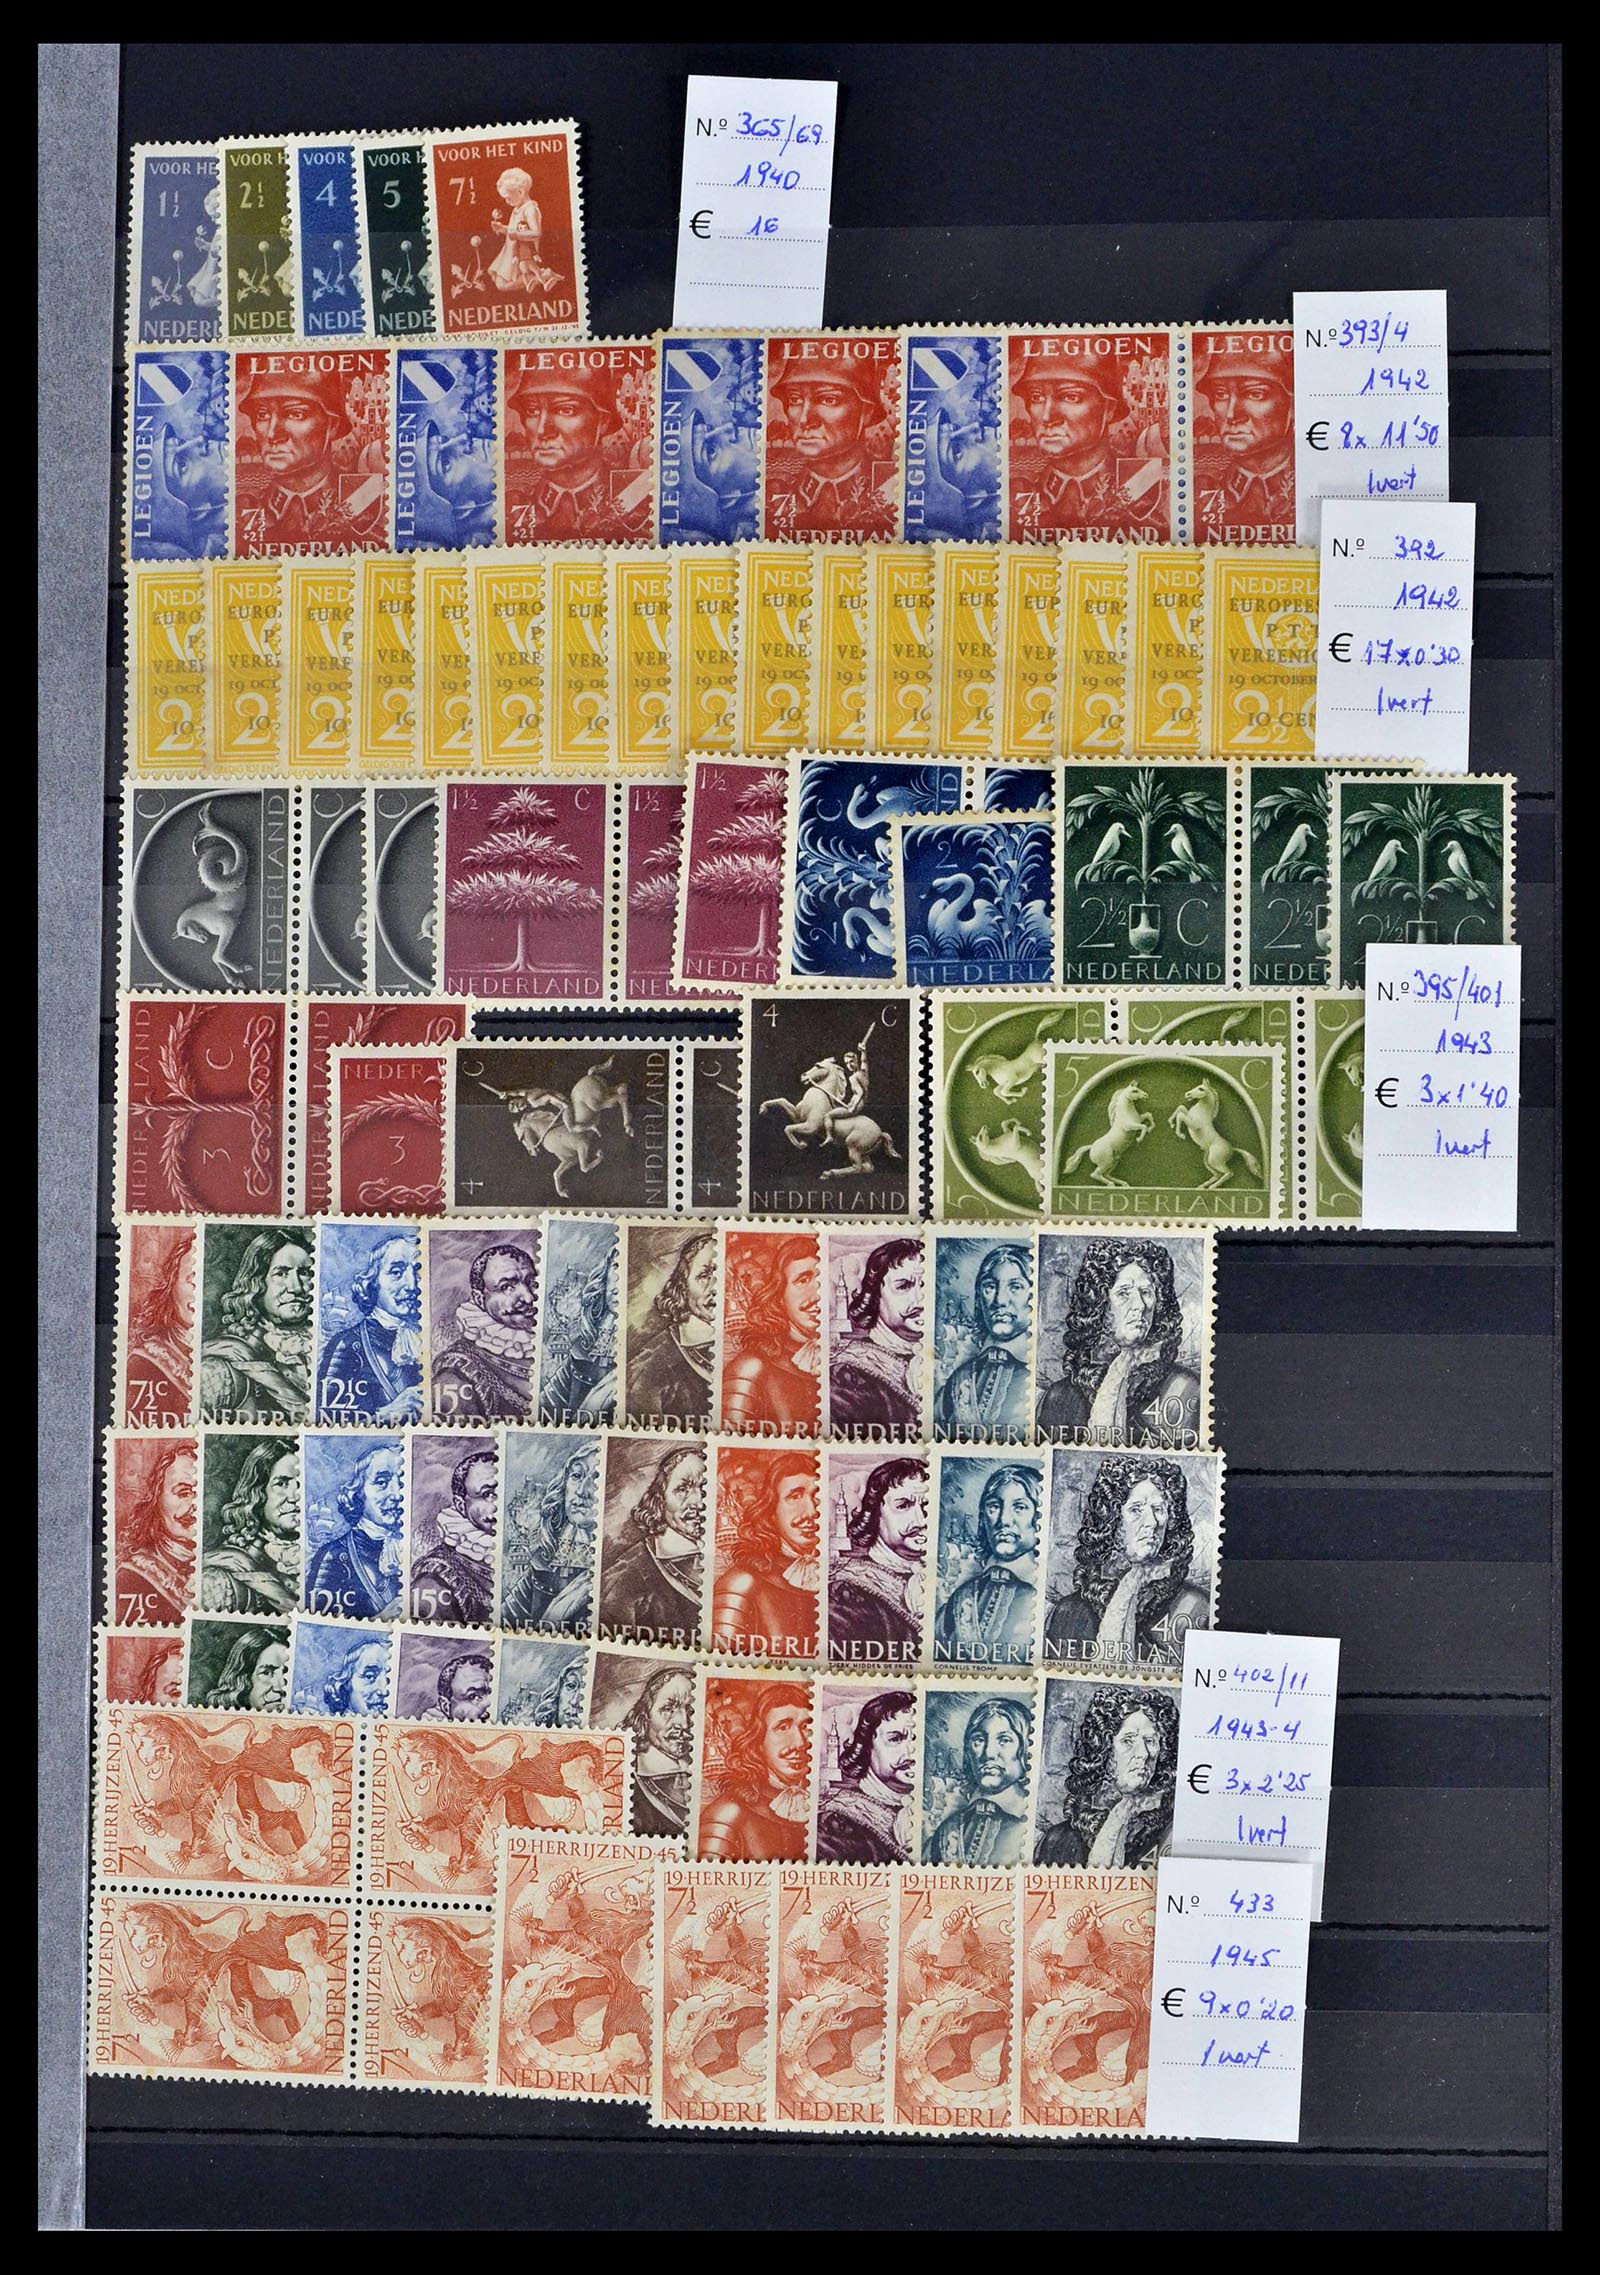 39236 0003 - Stamp collection 39236 European countries 40s-60s.